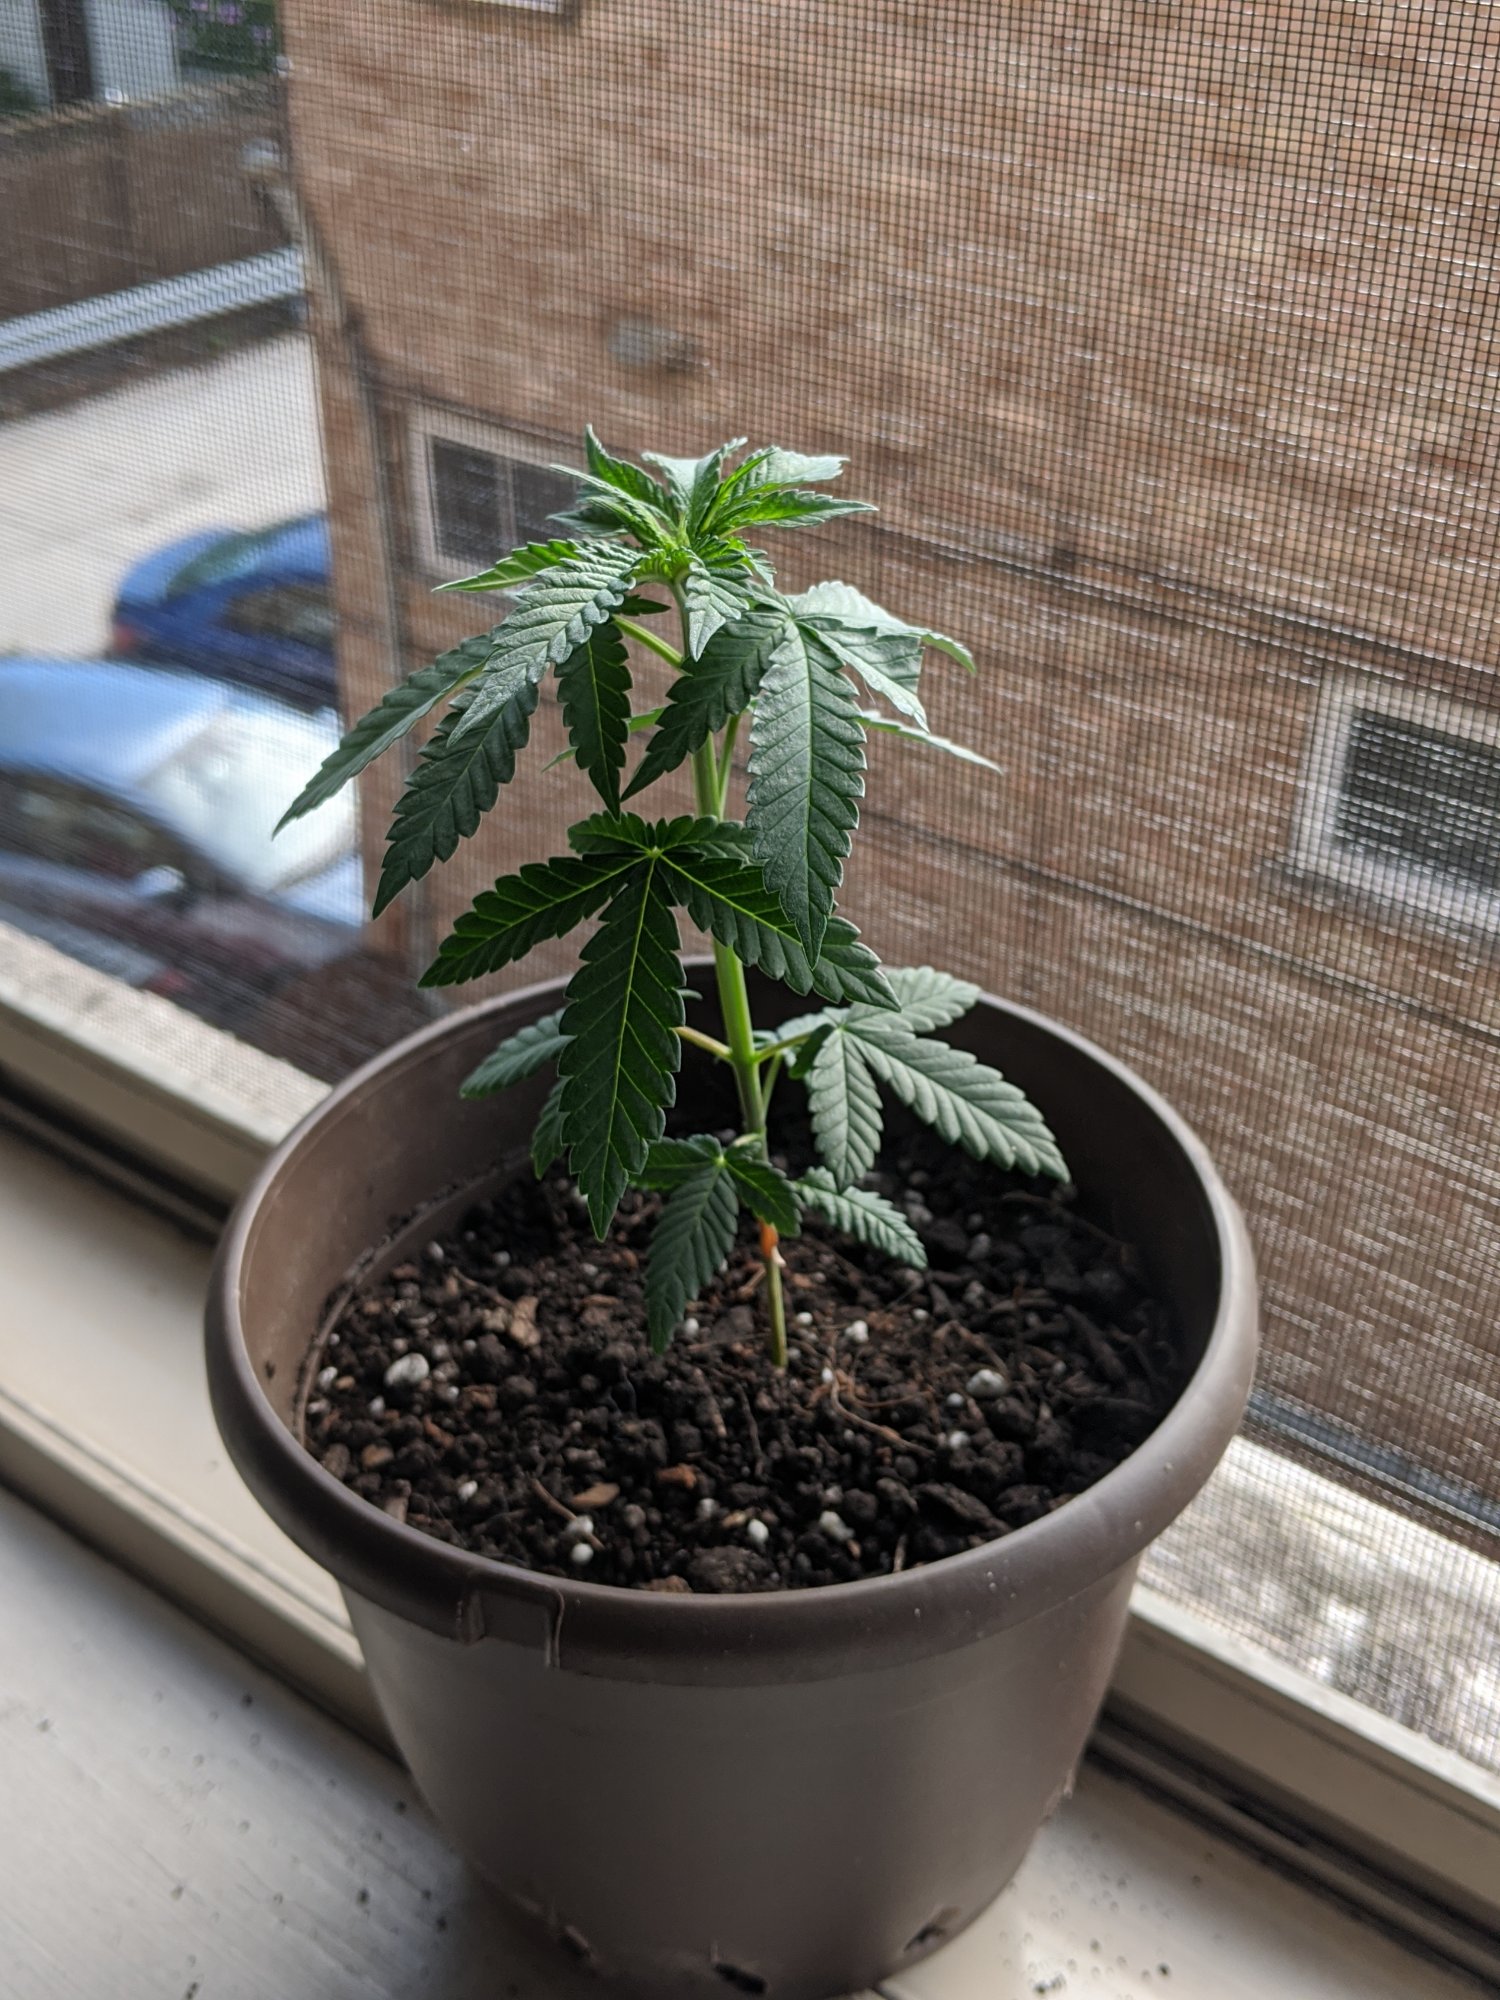 Will this plant be okay 2